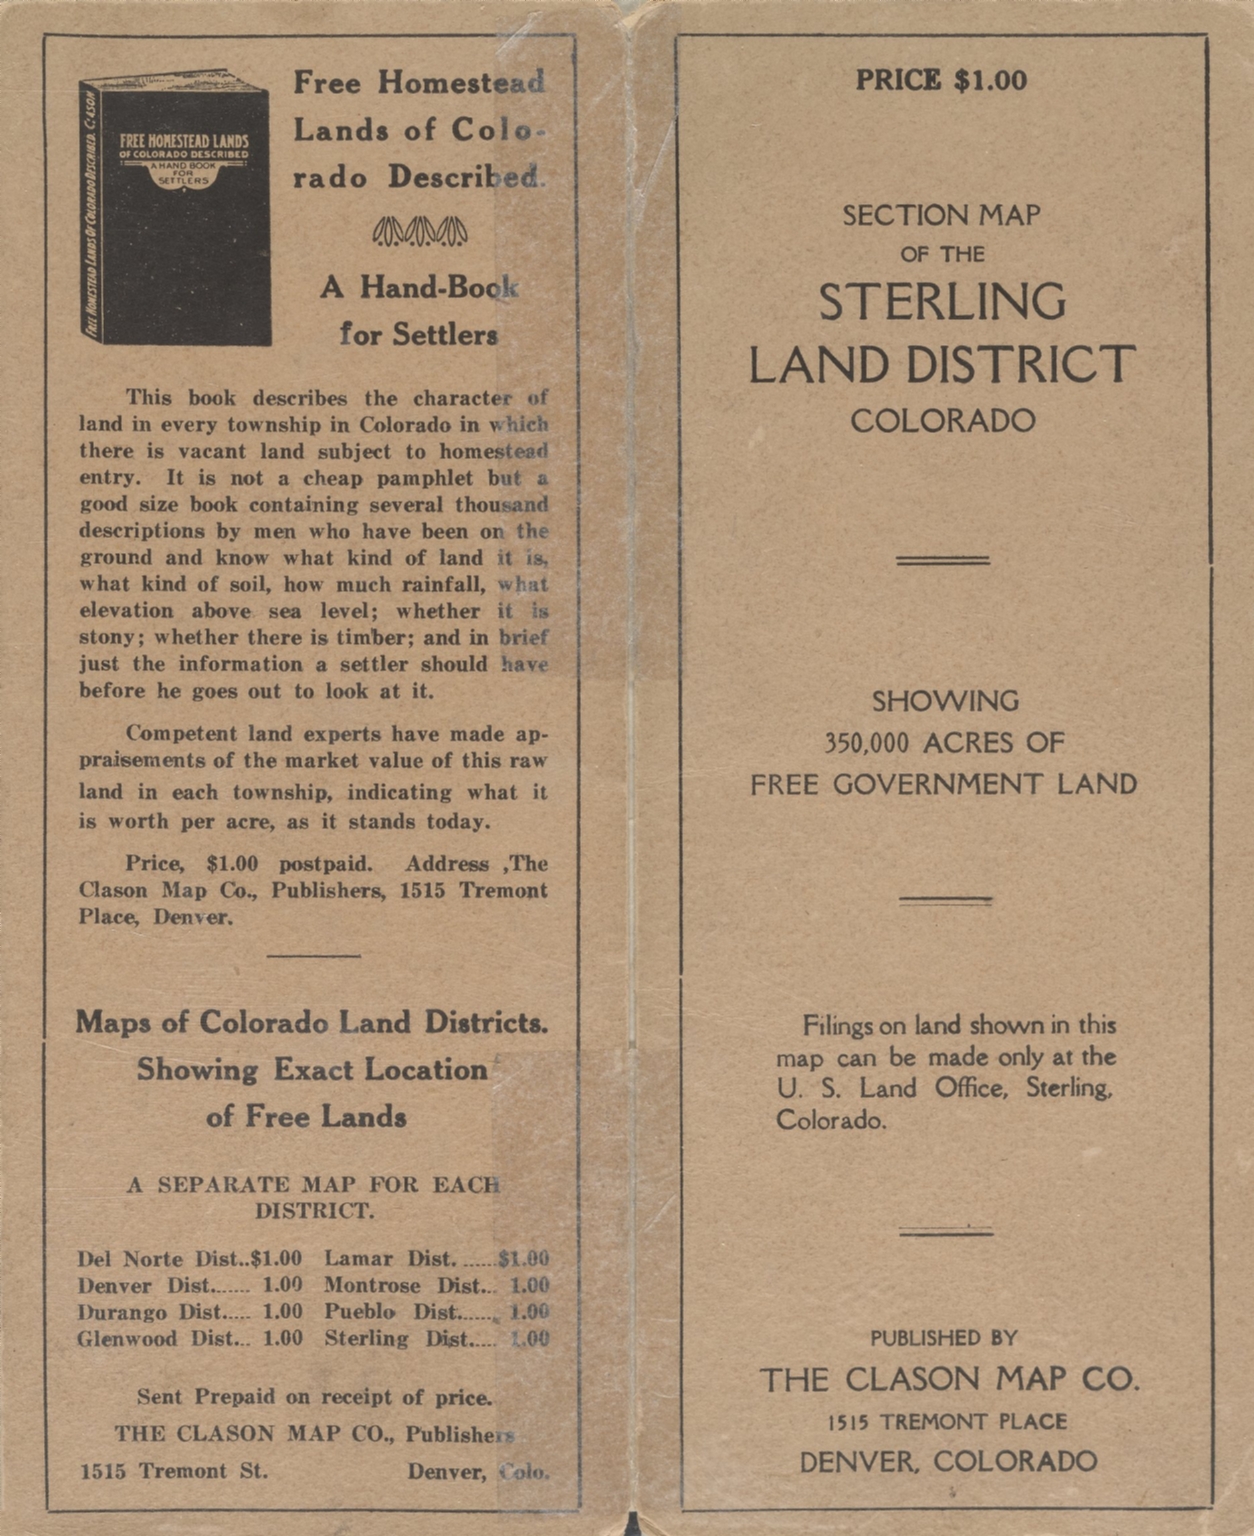 Clason's map of the Sterling Land District, Colorado